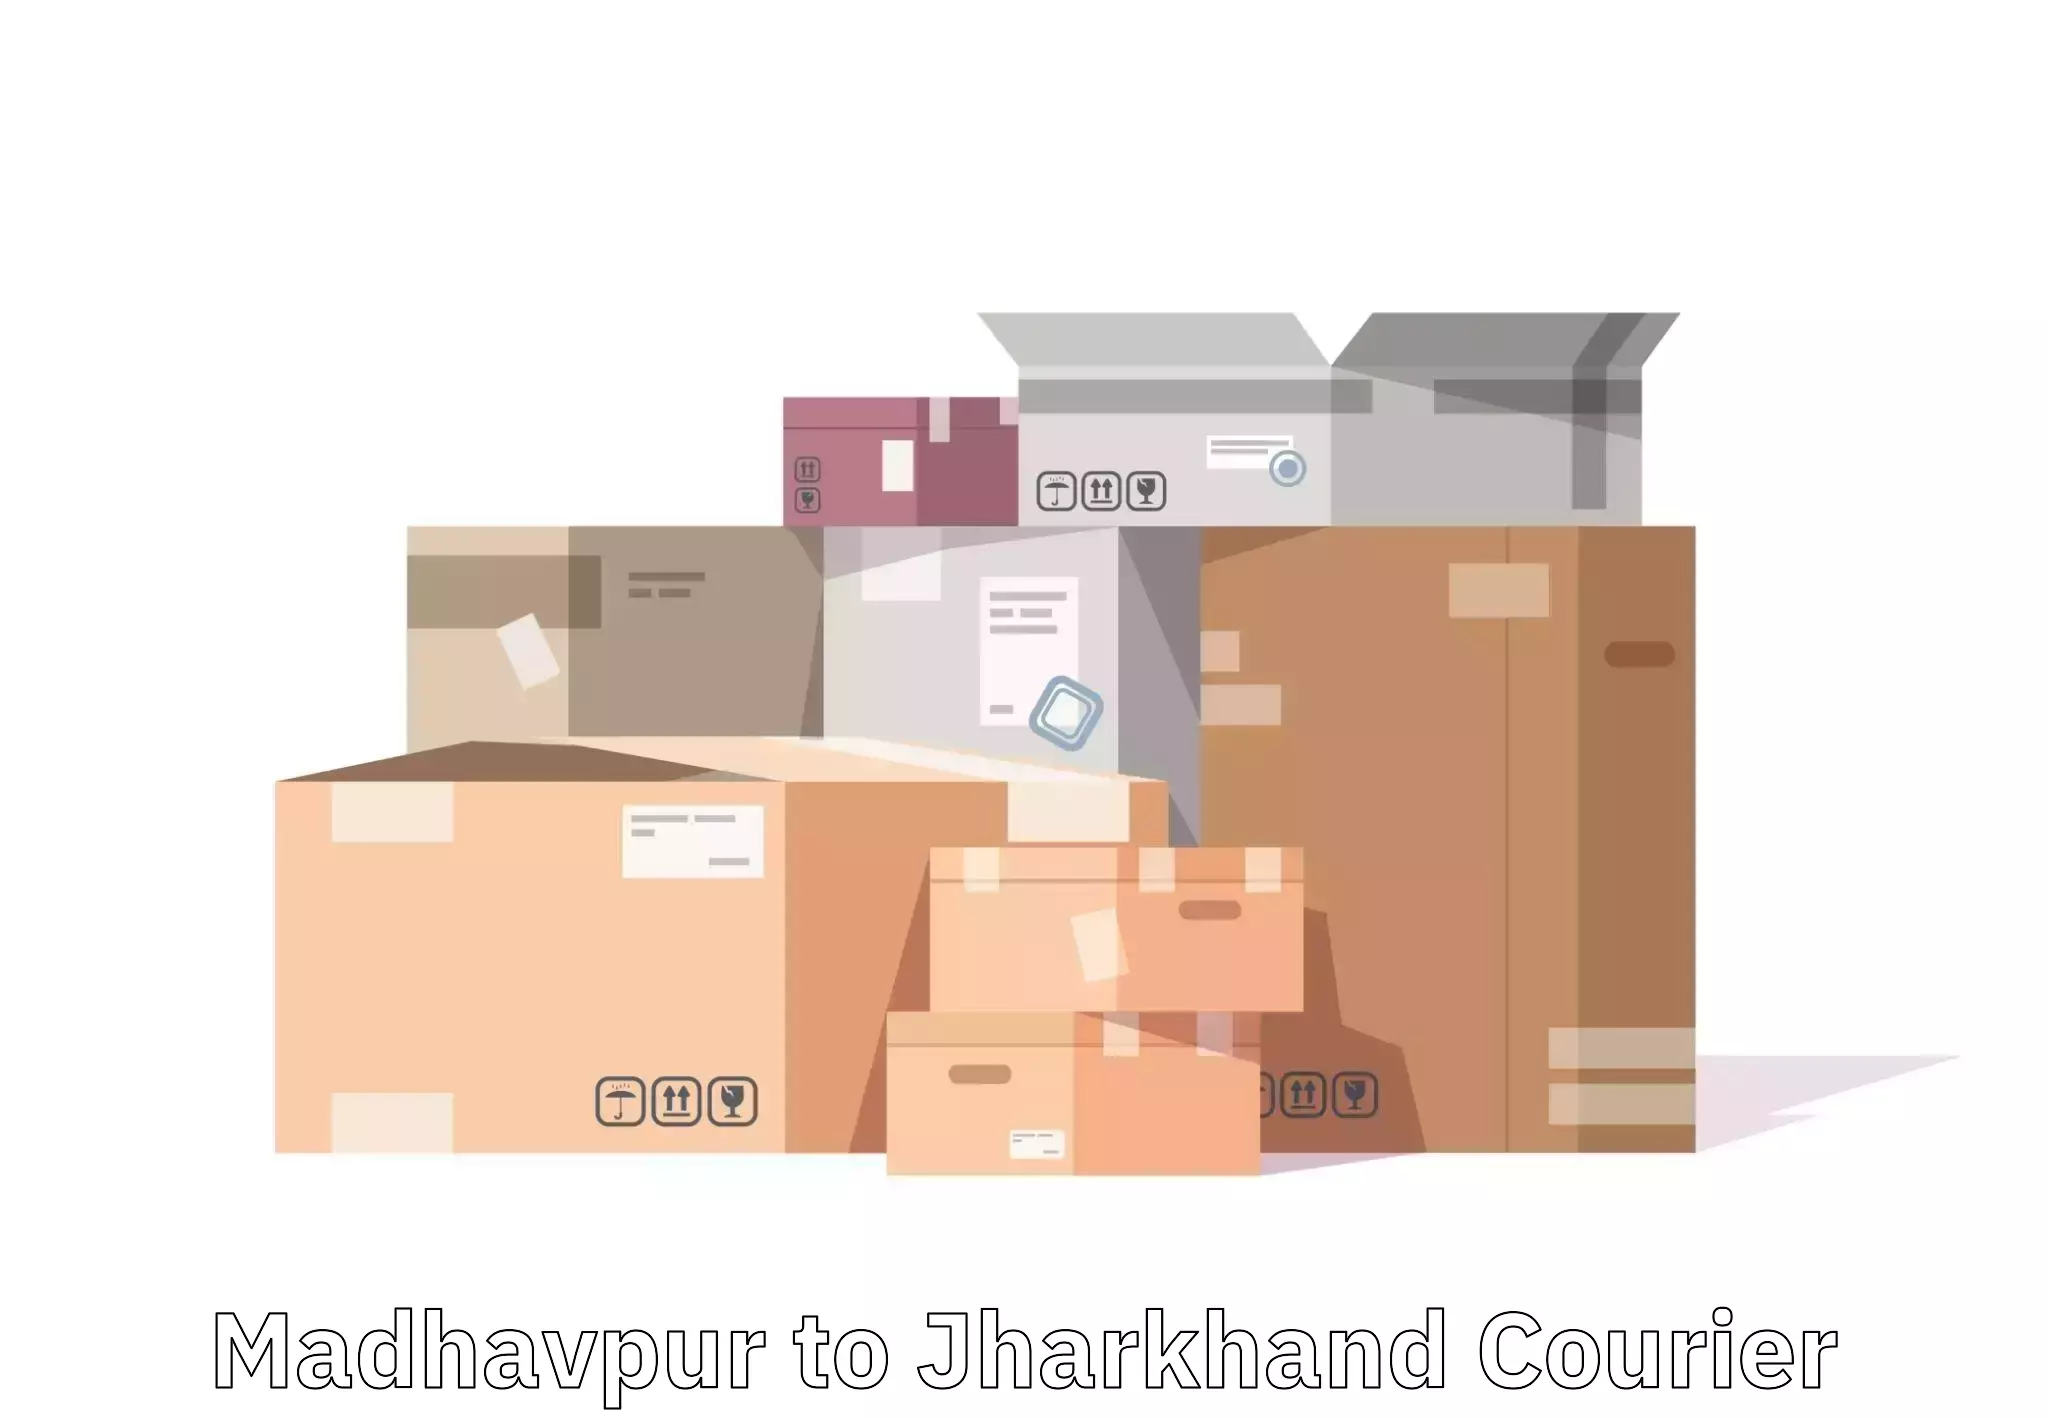 Luggage shipment specialists Madhavpur to Dhanbad